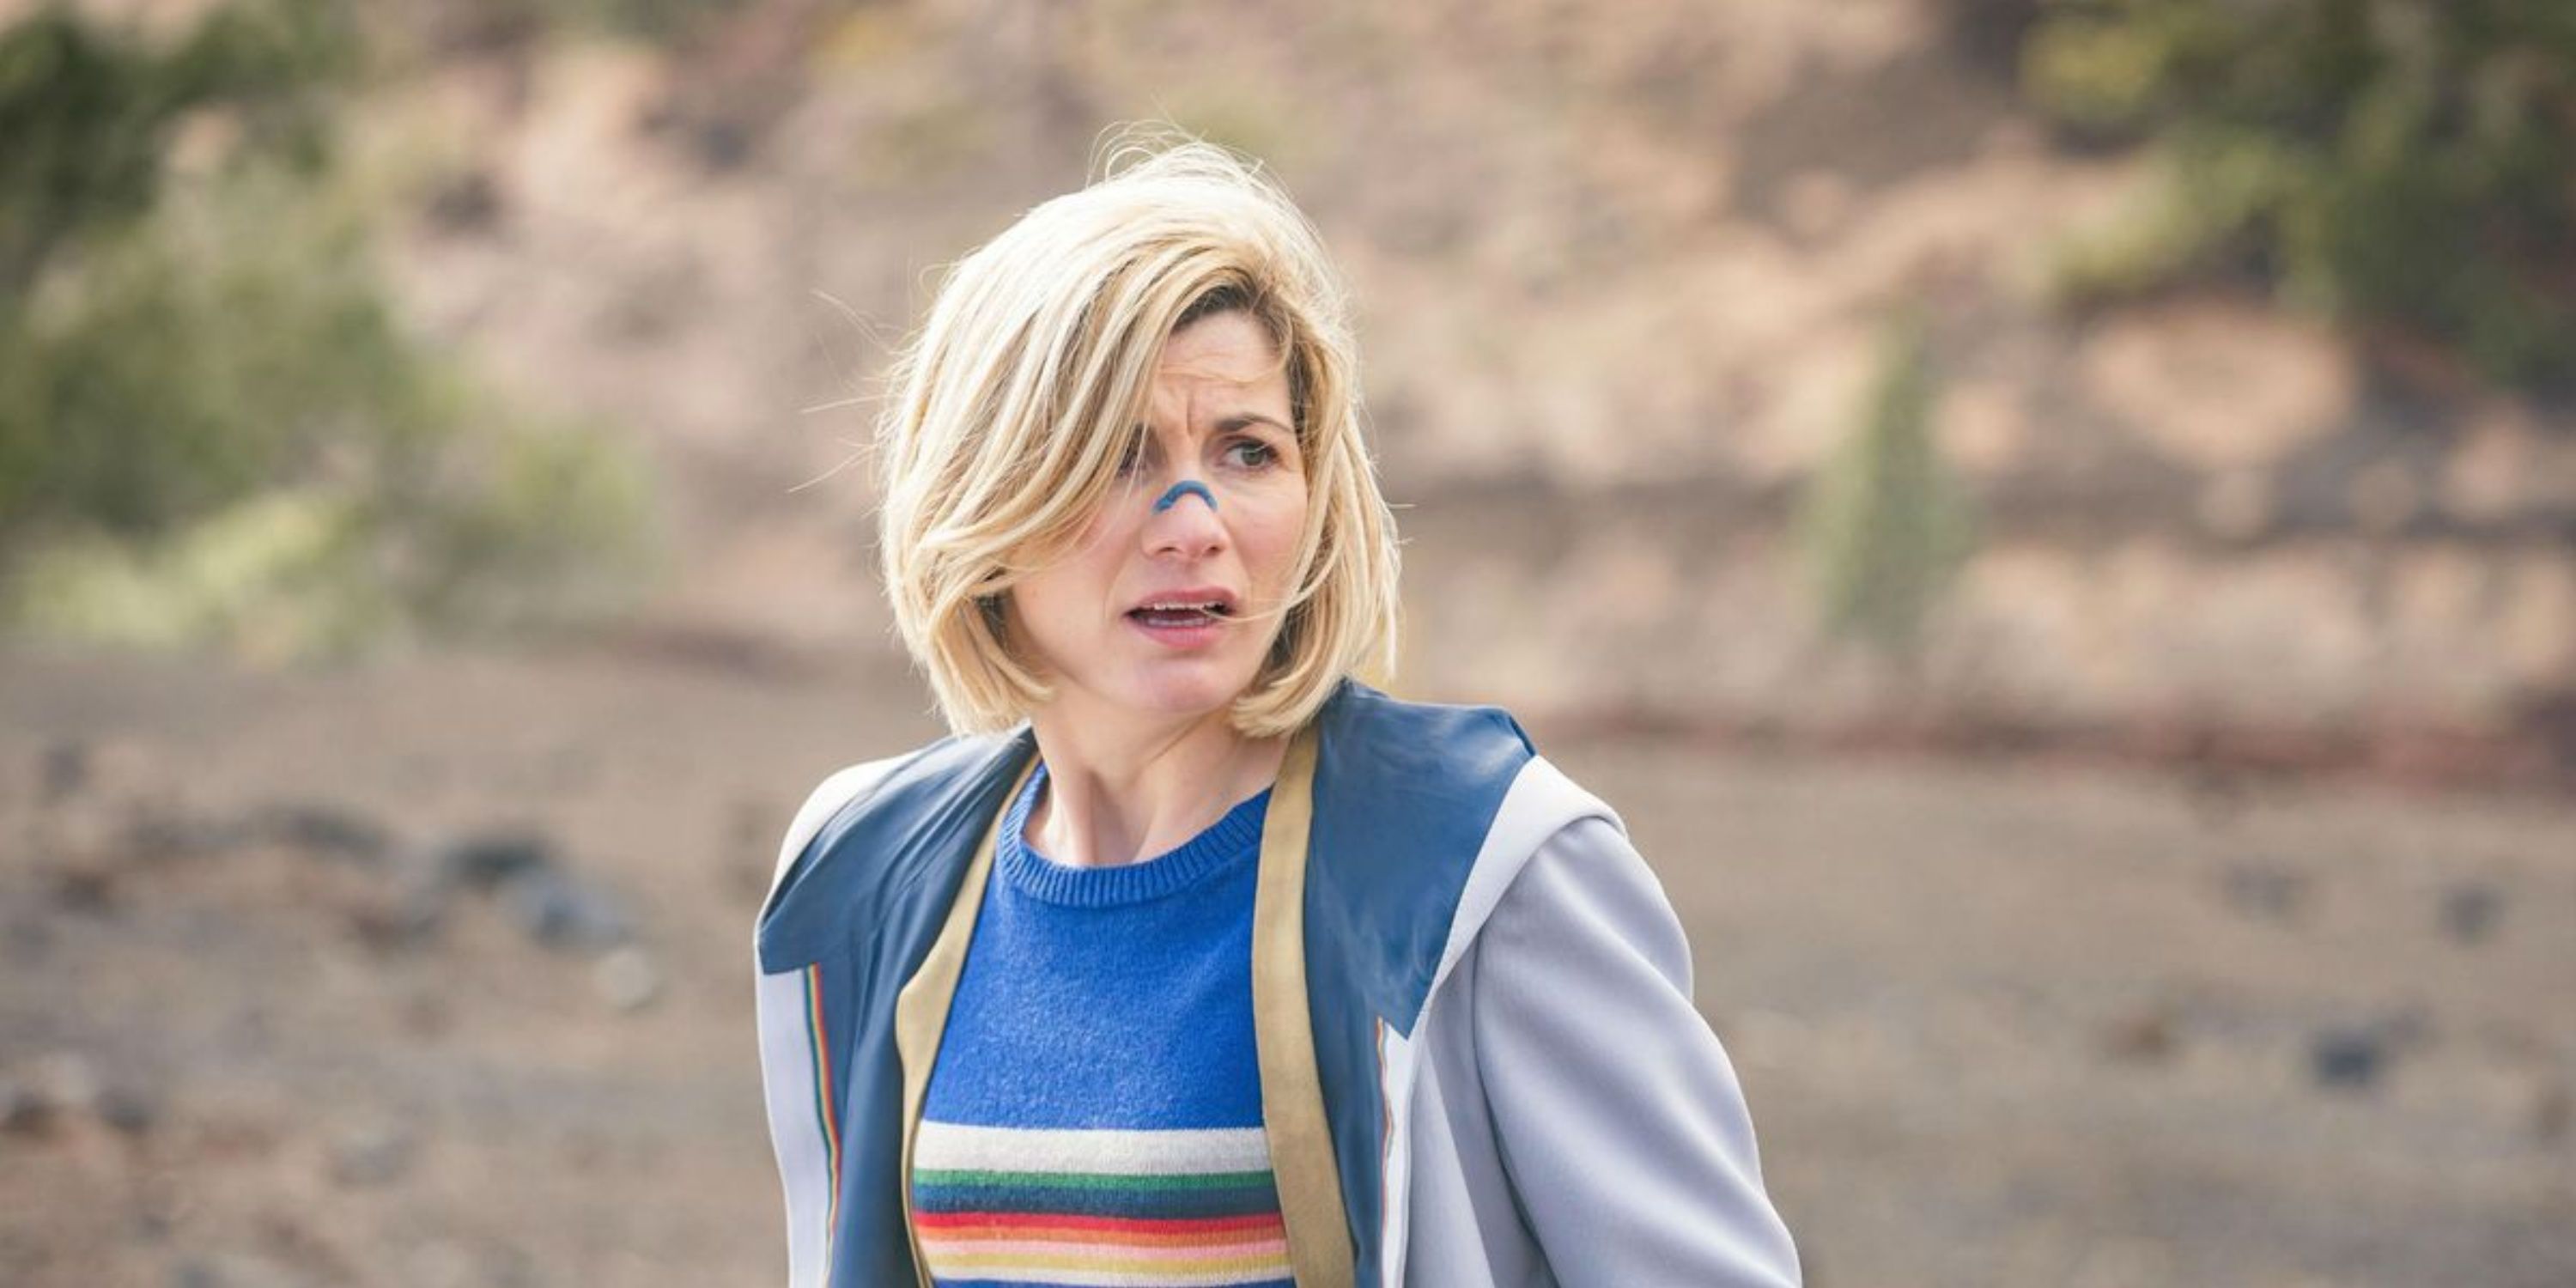 Jodie Whittaker worriedly looks off-screen as the Thirteenth Doctor in Doctor Who